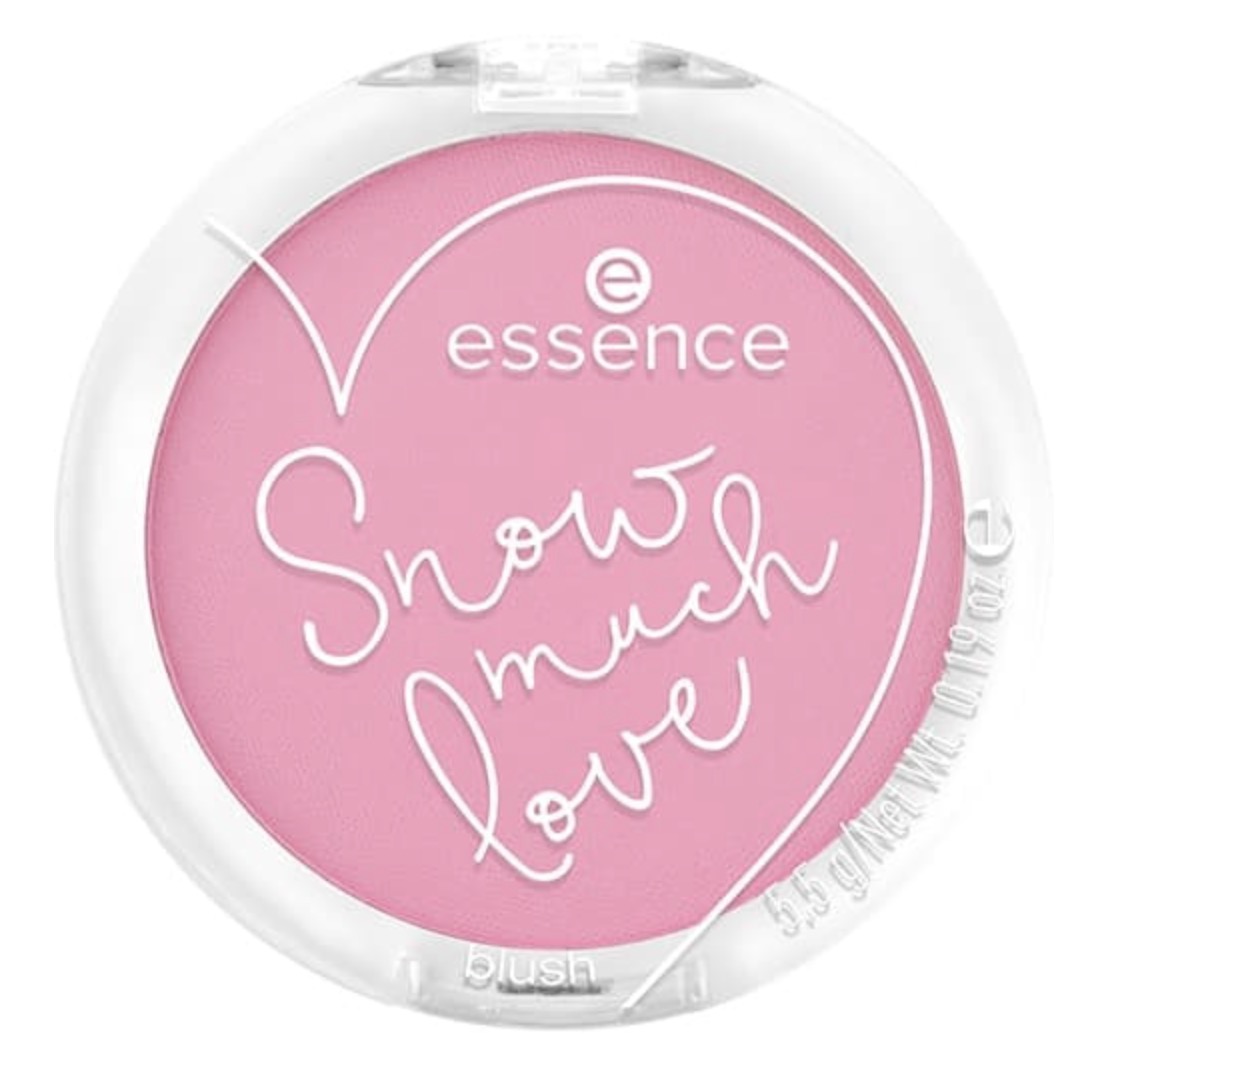 Essence Snow much love collection